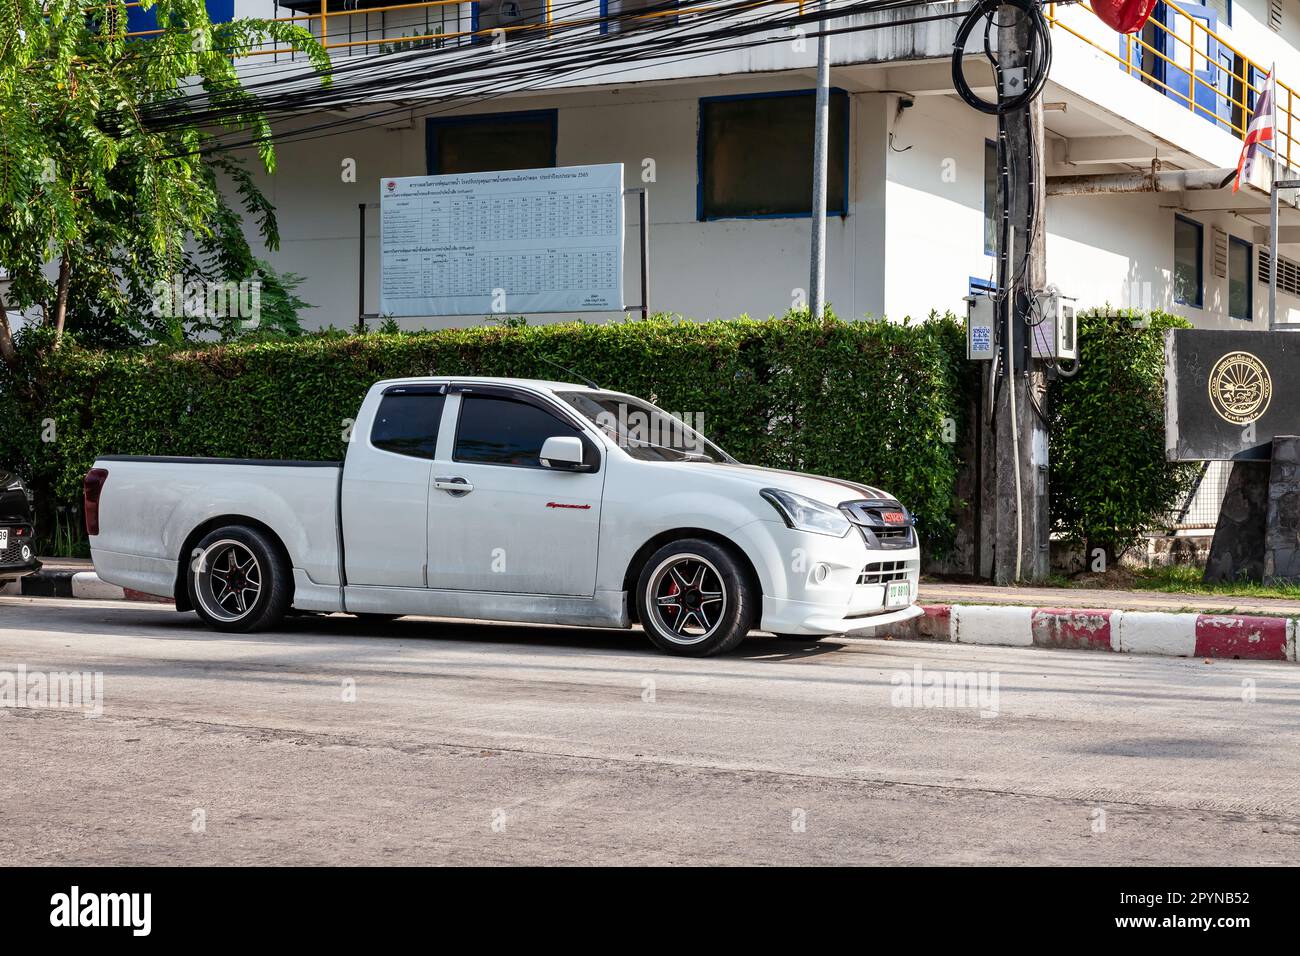 Thailand, Phuket - 03.31.23: Low ride car Isuzu D-Max Pickup with big alloy wheels on the road in the city with traffic. Stock Photo